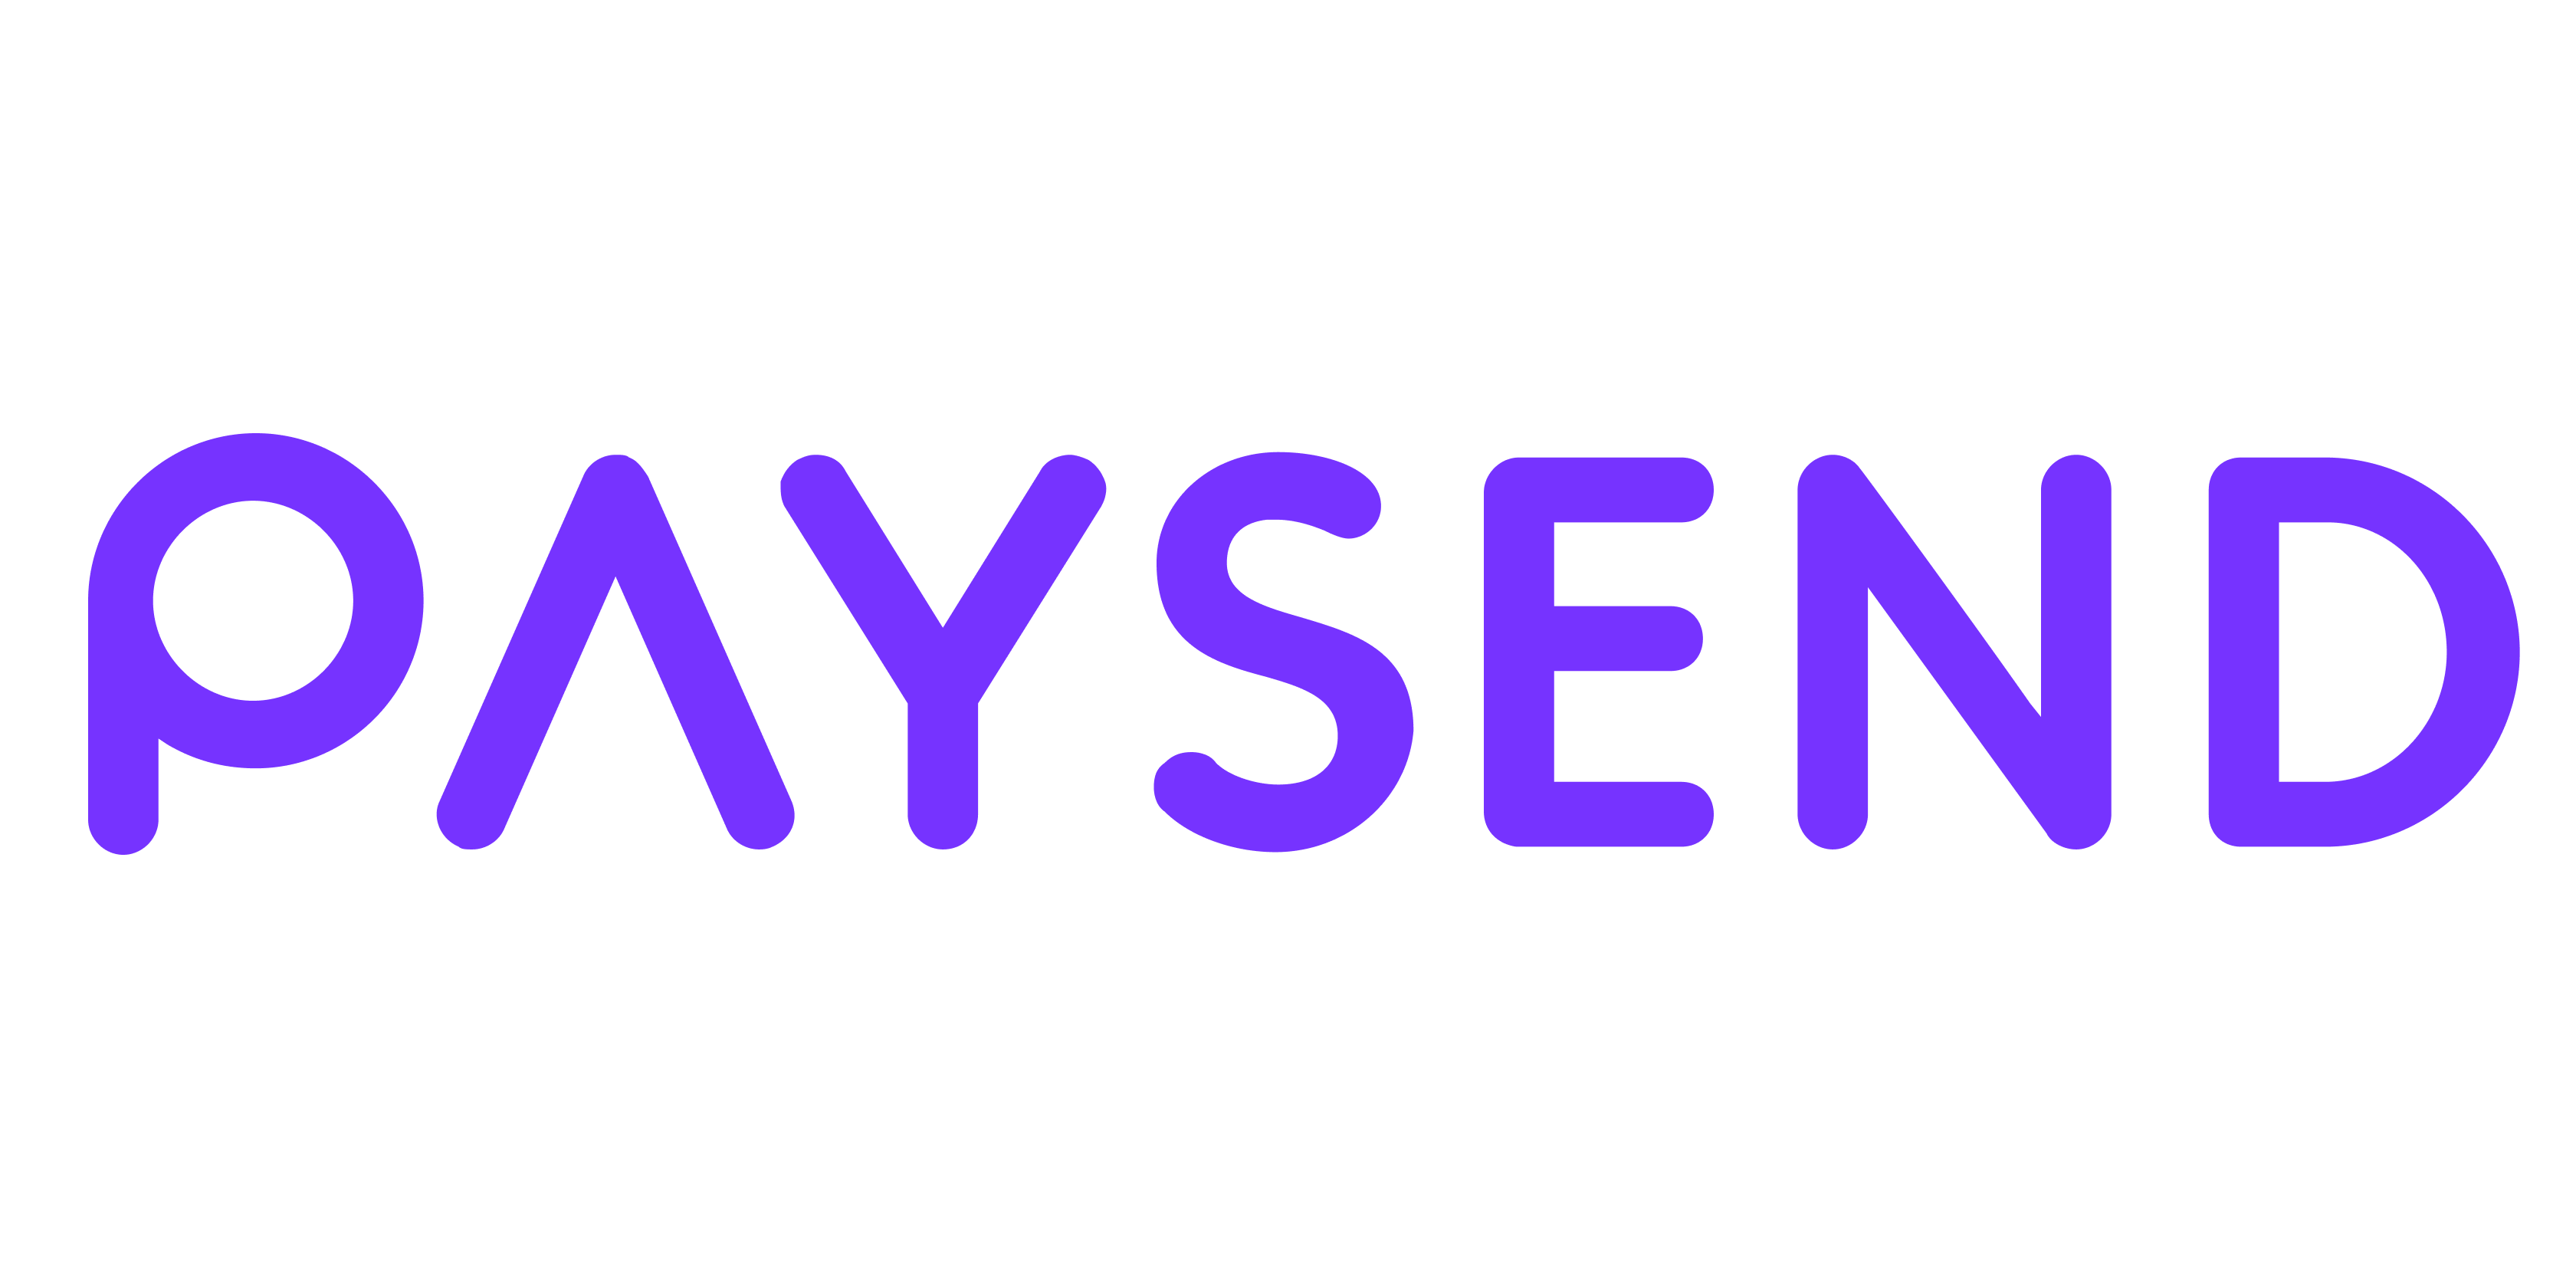 Paysend Welcomes 300,000 U.S. Customers in 9 months as Demand for International Digital Money Transfers Grows